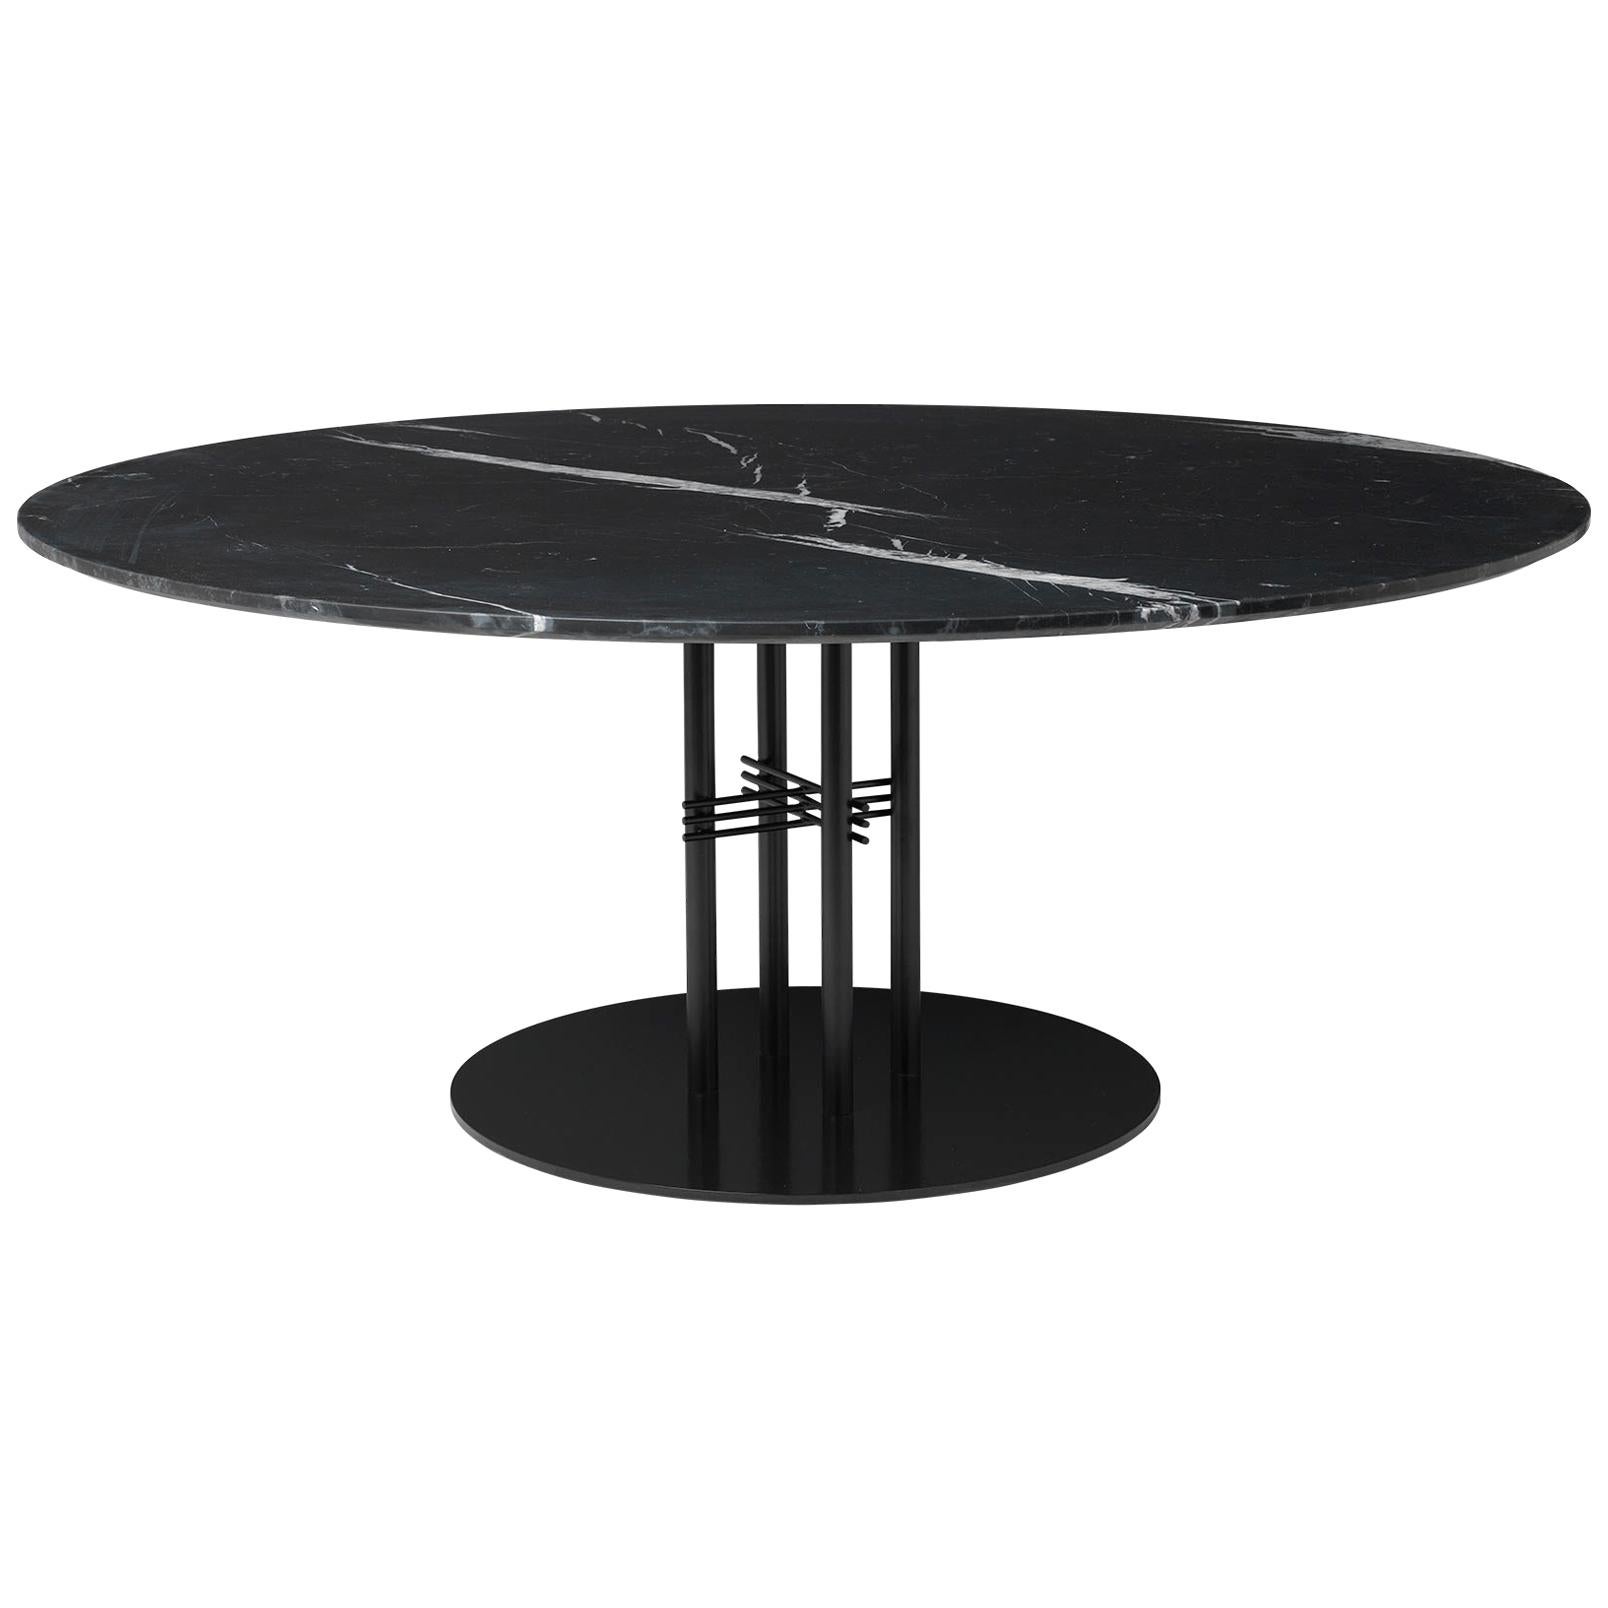 TS Column Lounge Table, Round, Black Base, Large, Marble For Sale